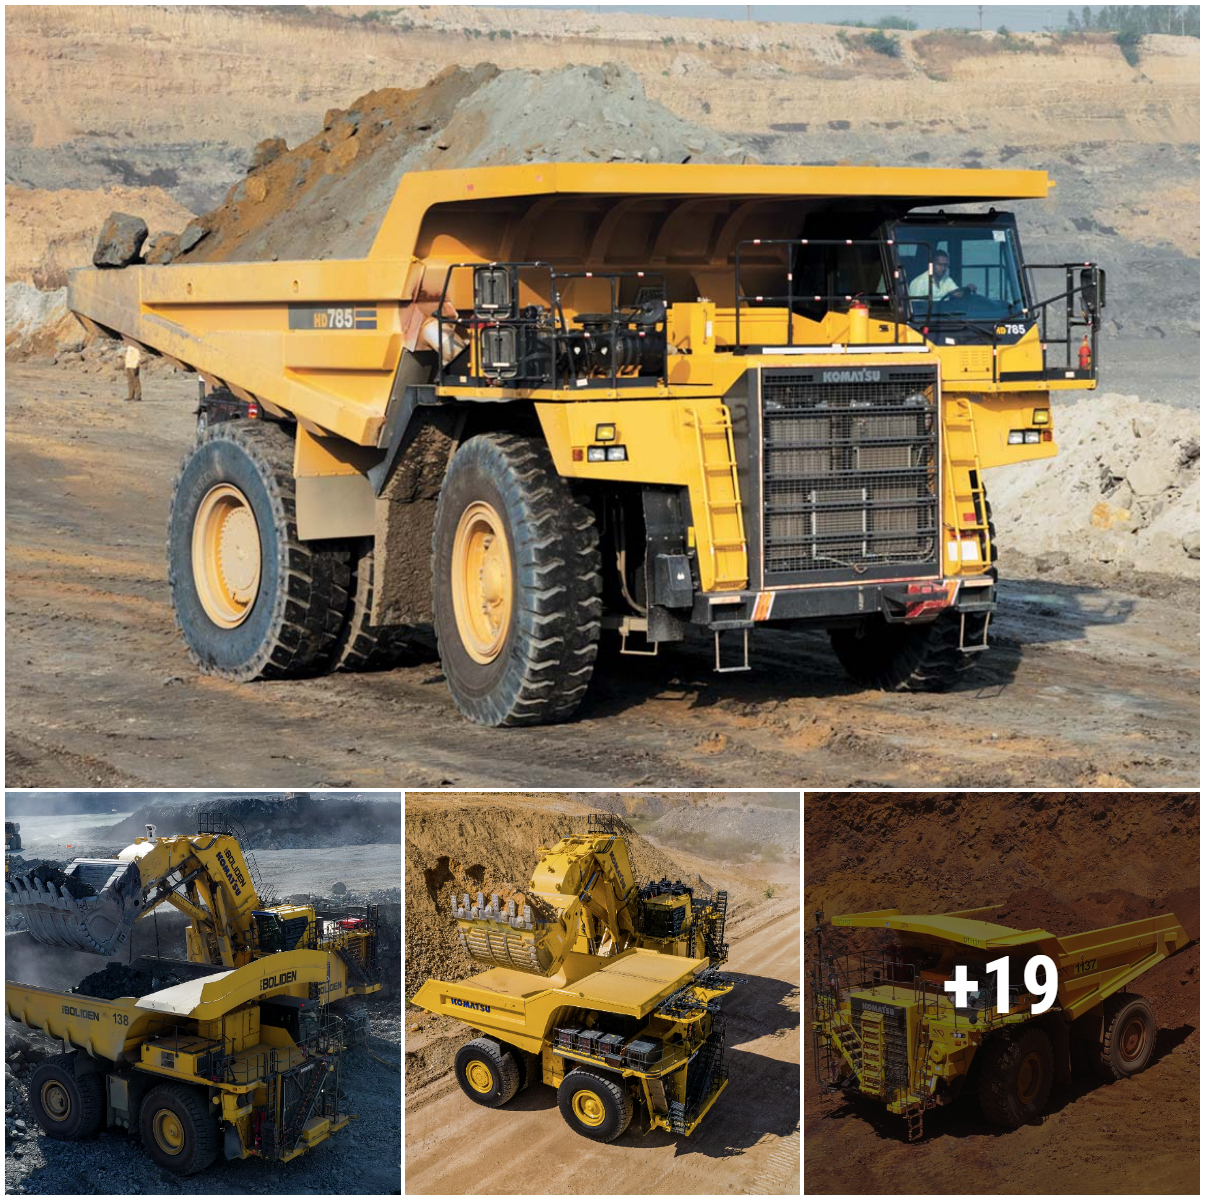 Use Komatsu’s largest mining machinery to extract iron ore from the surface